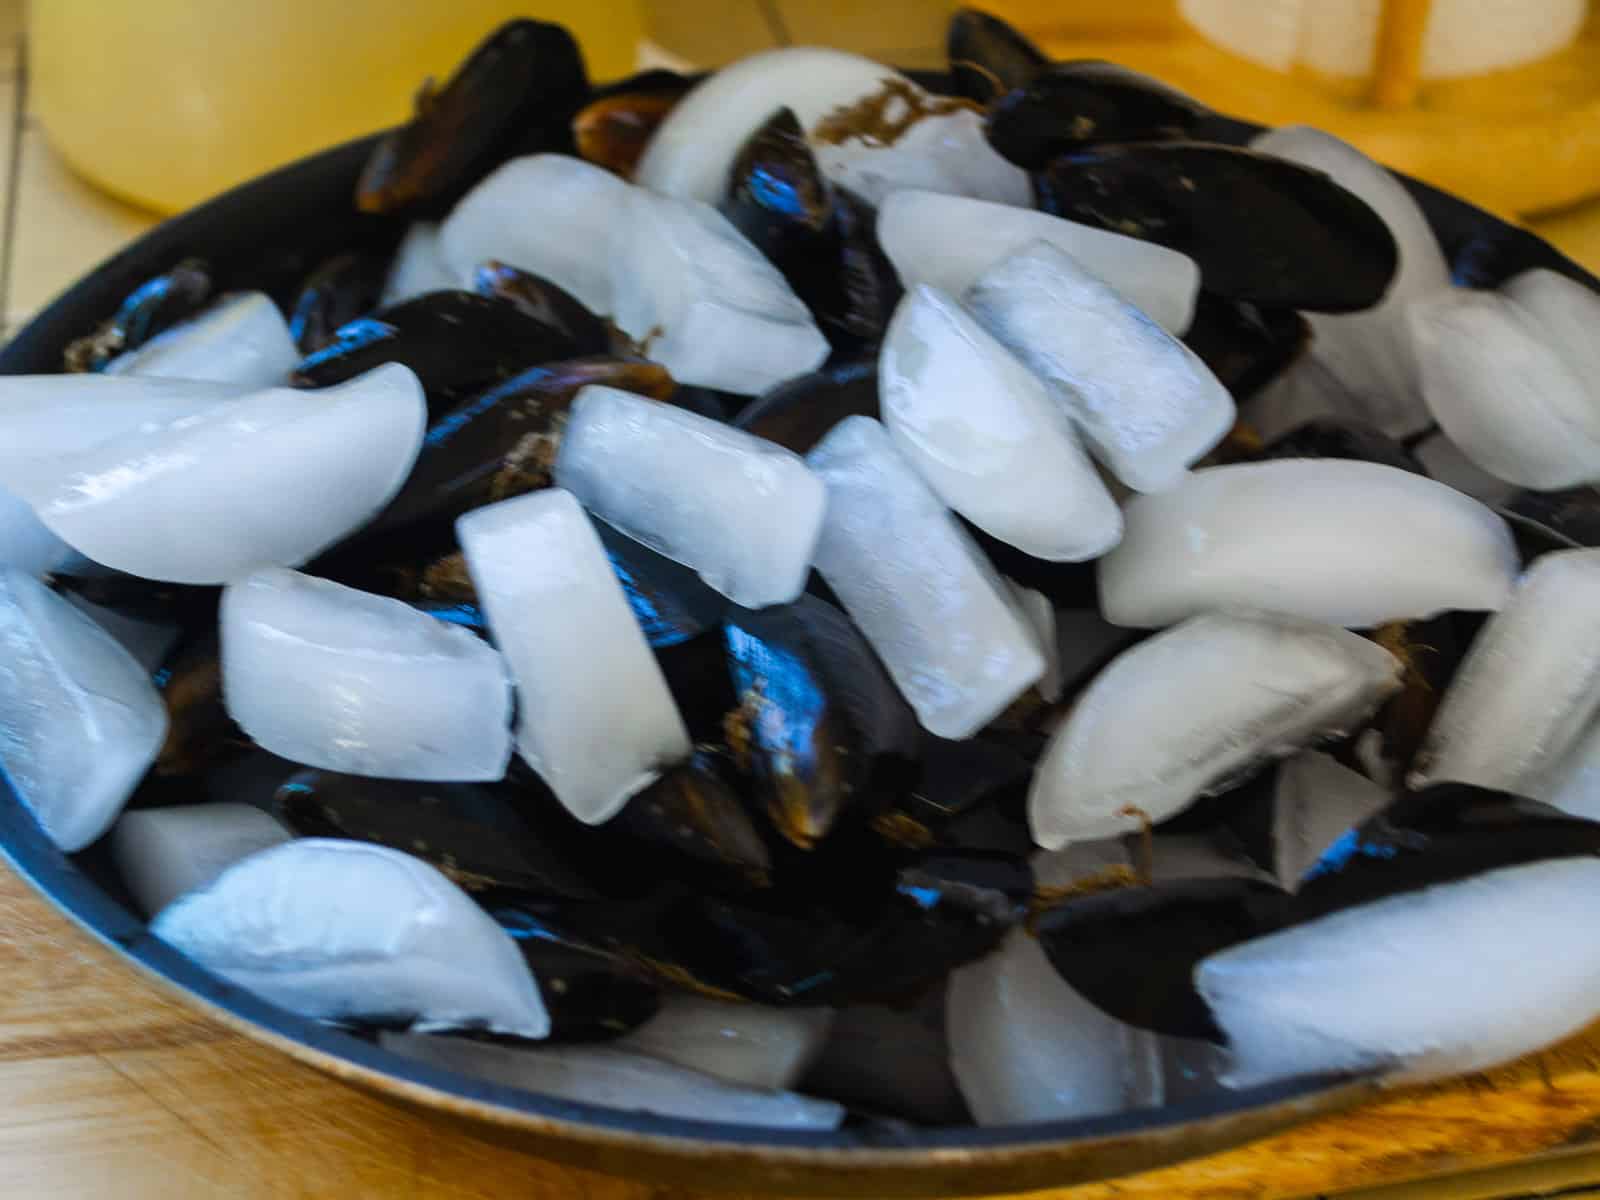 Place the fresh mussels on ice to keep cold before cooking.